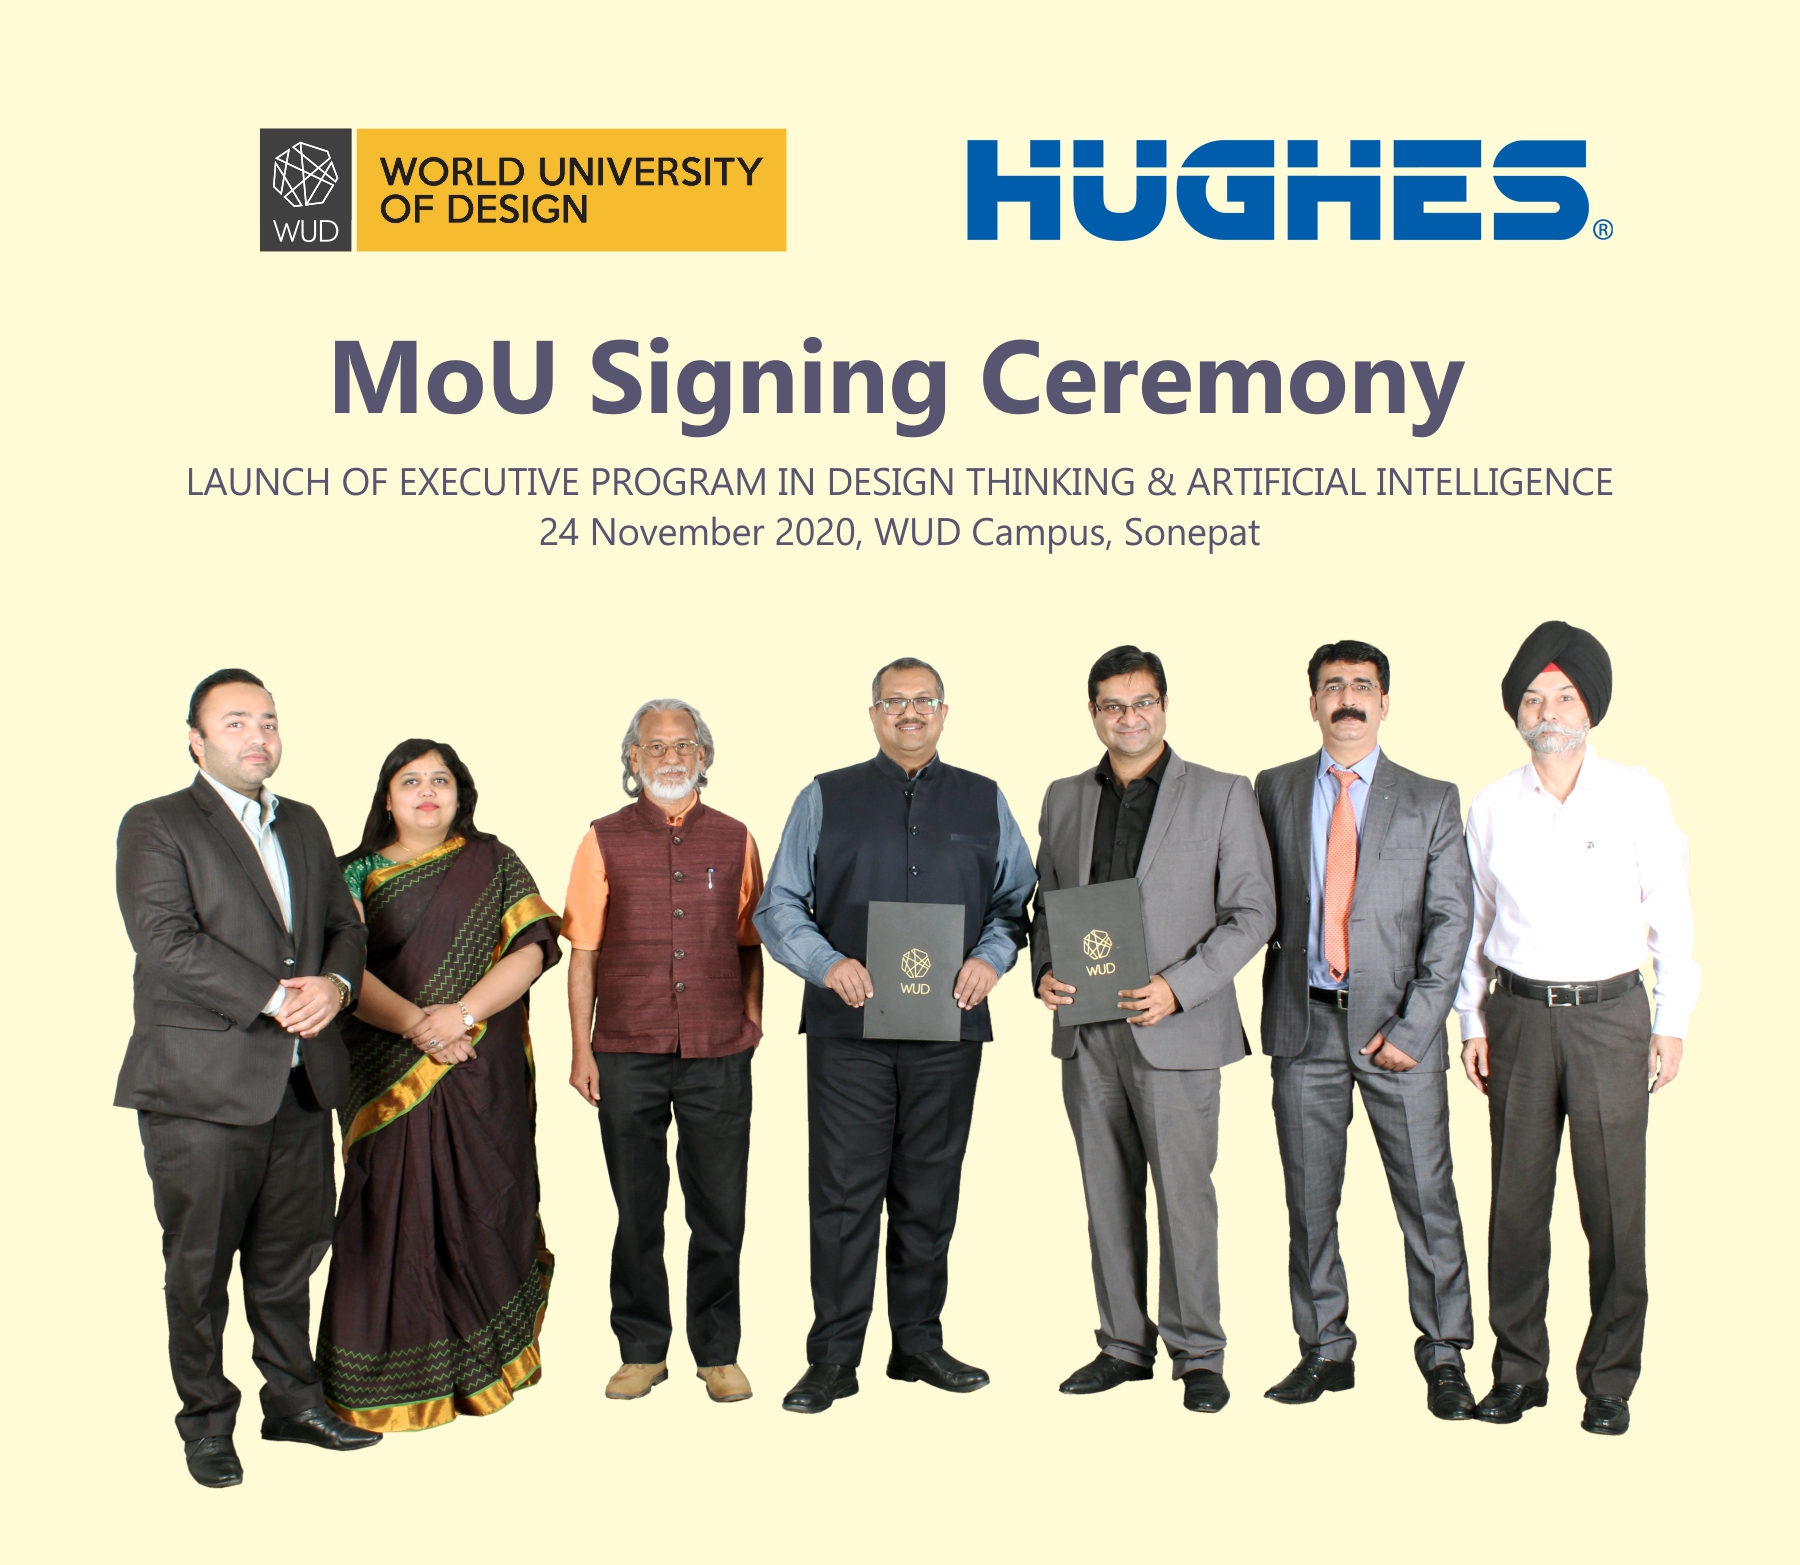 World University of Design and Hughes Global Education signs an Agreement of Cooperation to offer Design + Management Programs